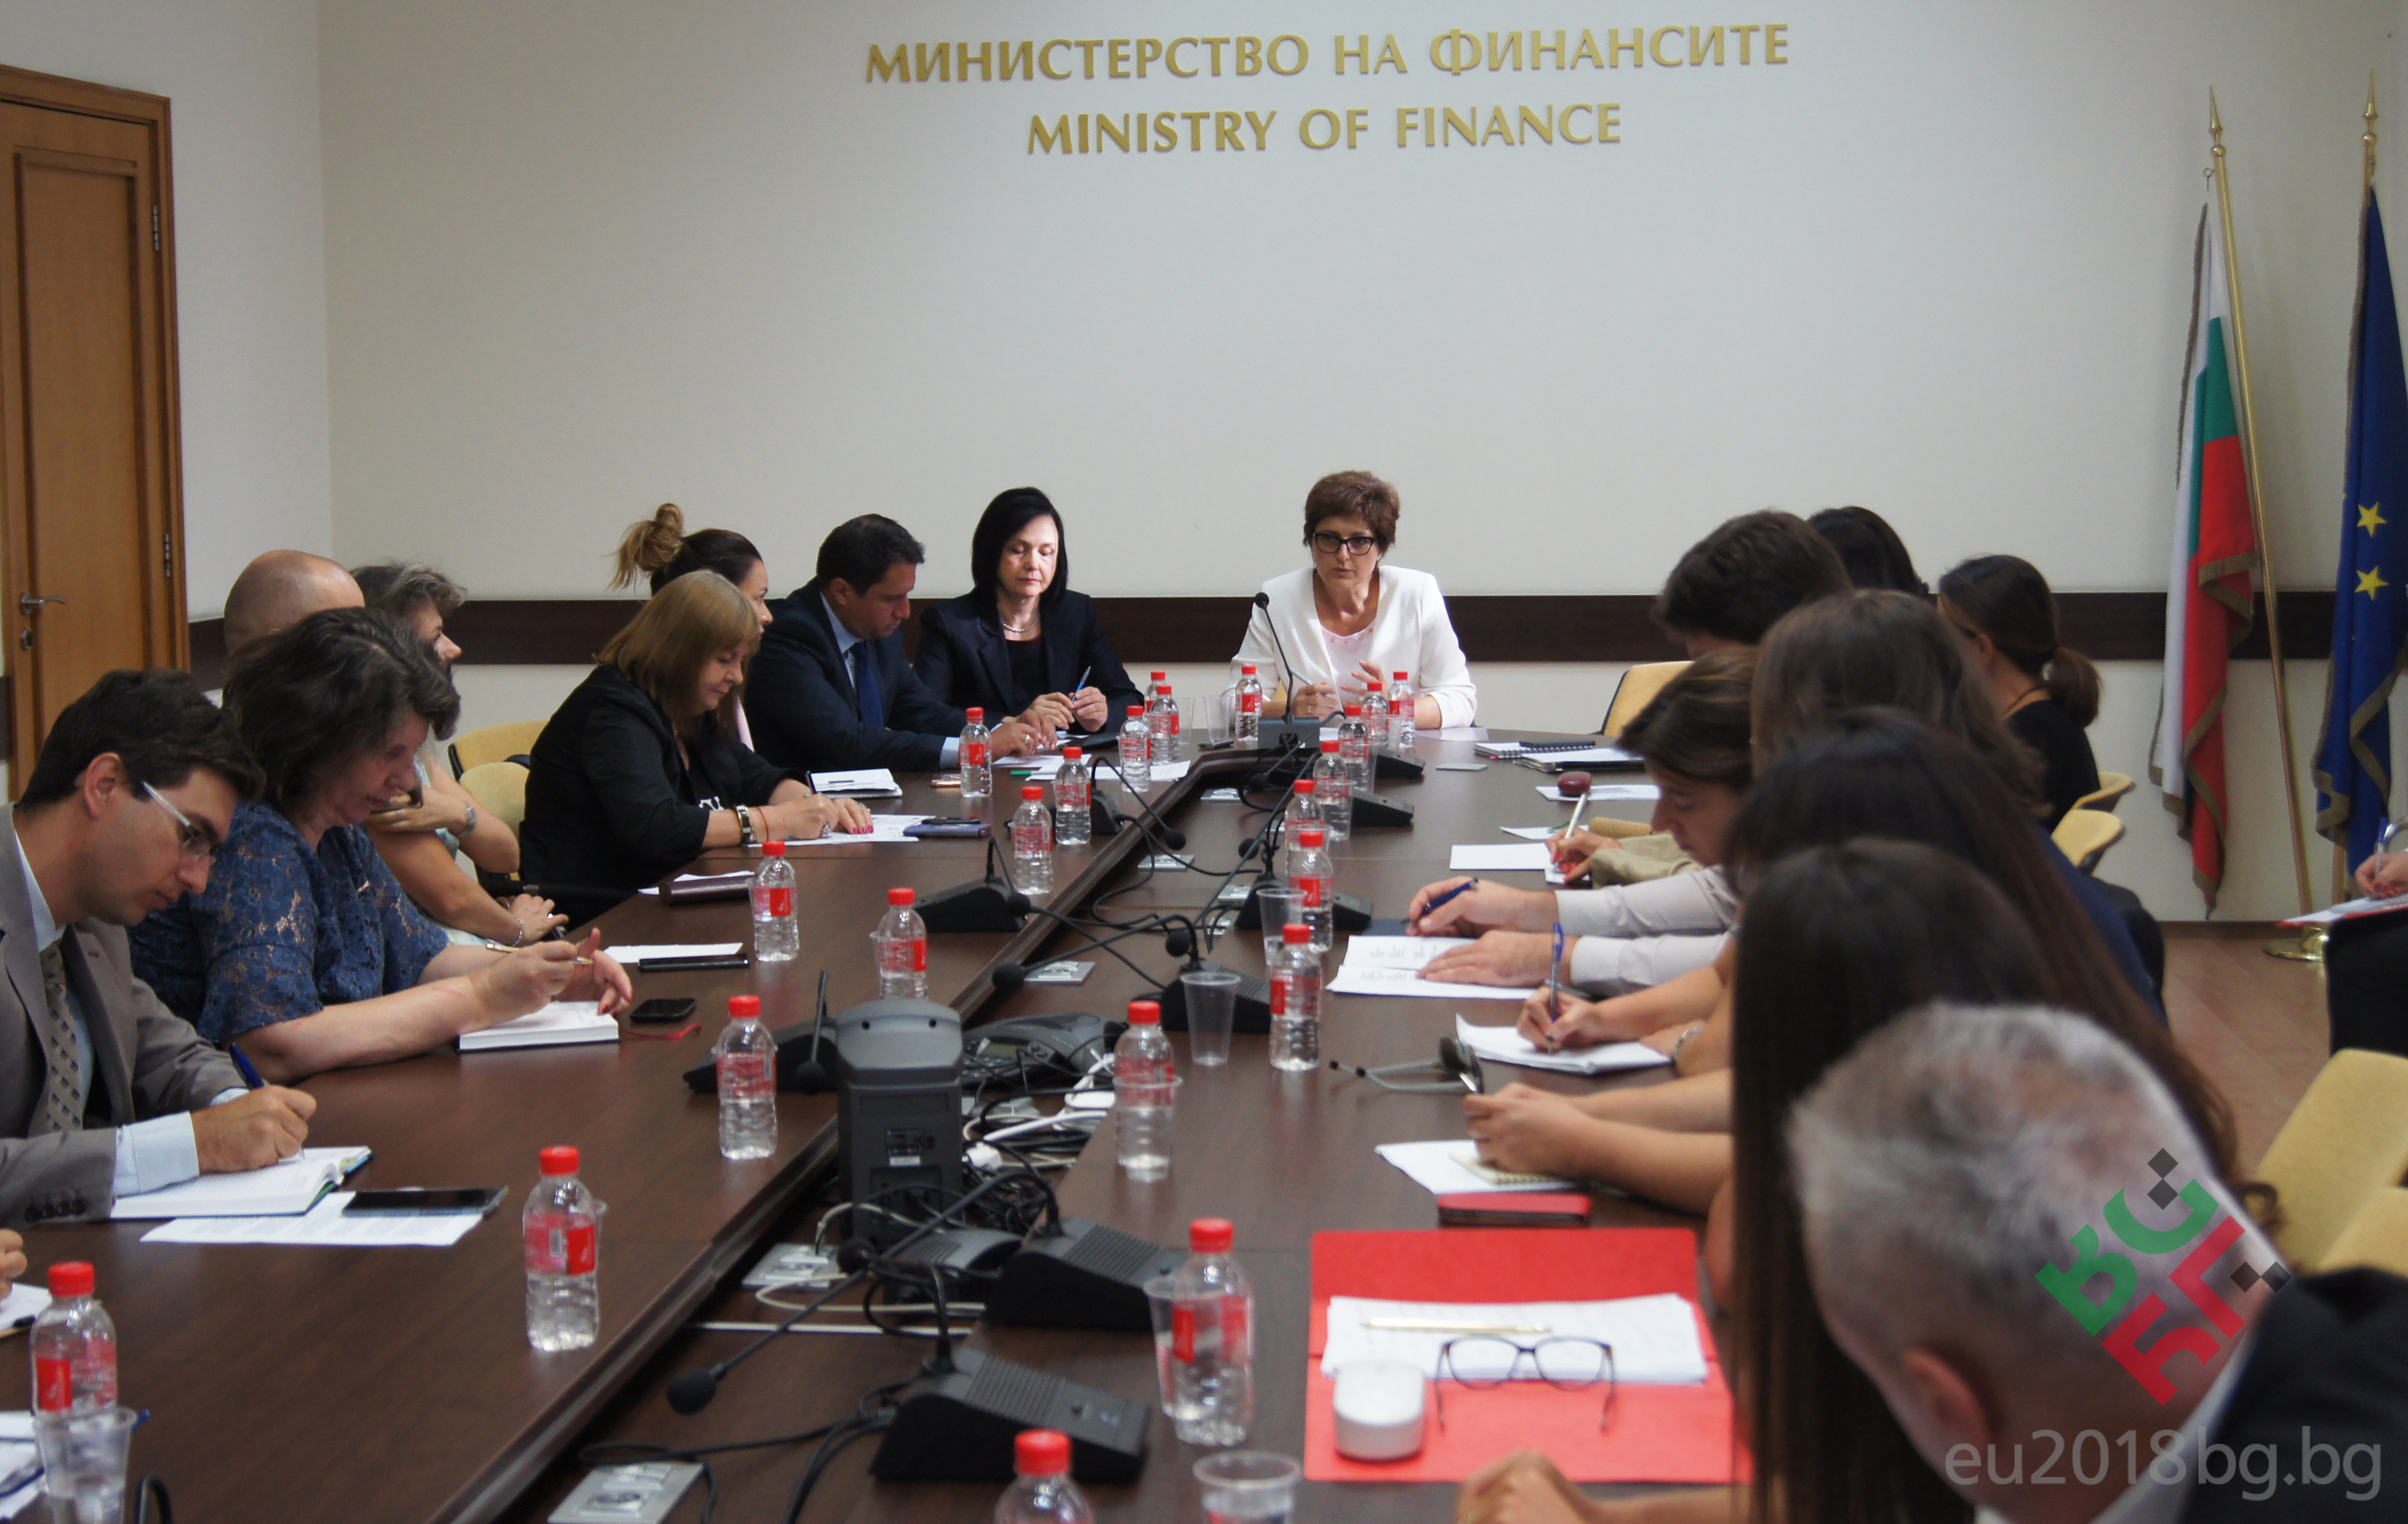 MOF ORGANISES DISCUSSION OF BULGARIAN PRESIDENCY PRIORITIES IN THE SECTOR OF FINANCIAL SERVICES